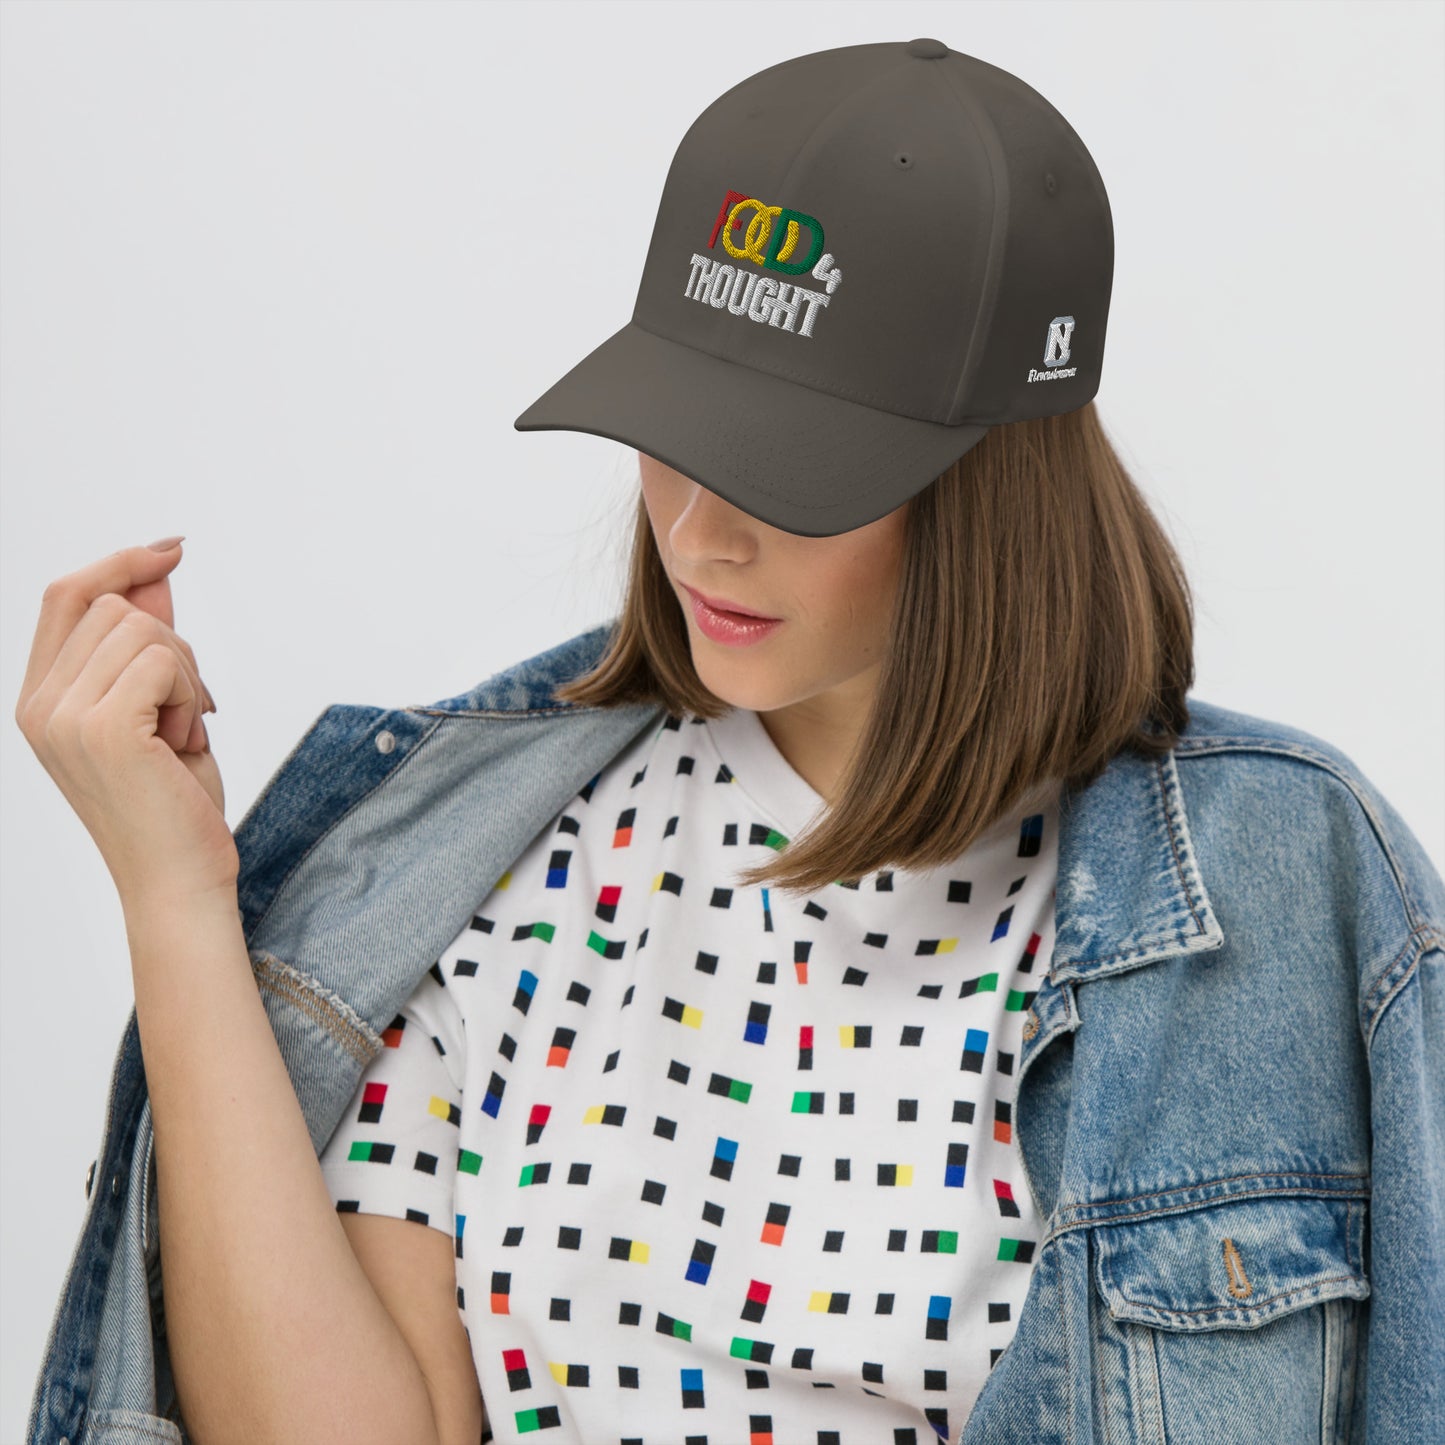 Food For Thought Colour Embroidered Structured Twill Cap - Front/Back/ Side